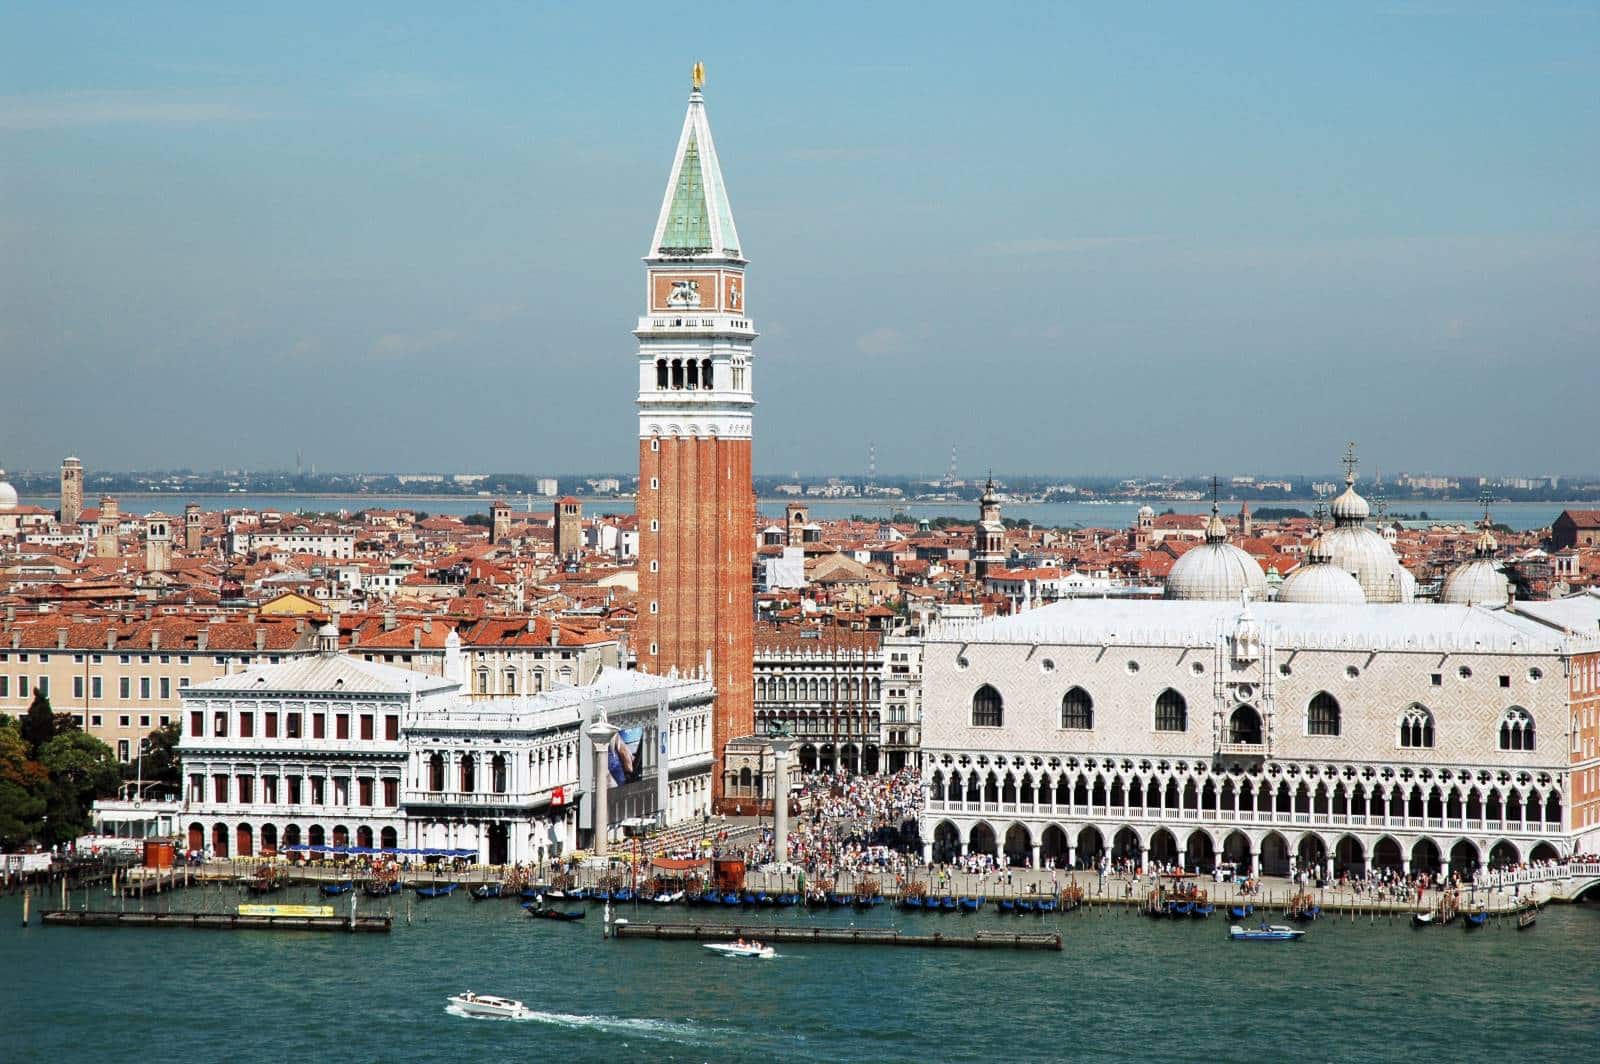 Image Credit: Shutterstock / Kristin Speed <p><span>Other critics claimed it could negatively affect the image and reputation of the city, which has long been one of the most visited areas in the world due to its famous canals, gondoliers, and historic buildings. </span></p>